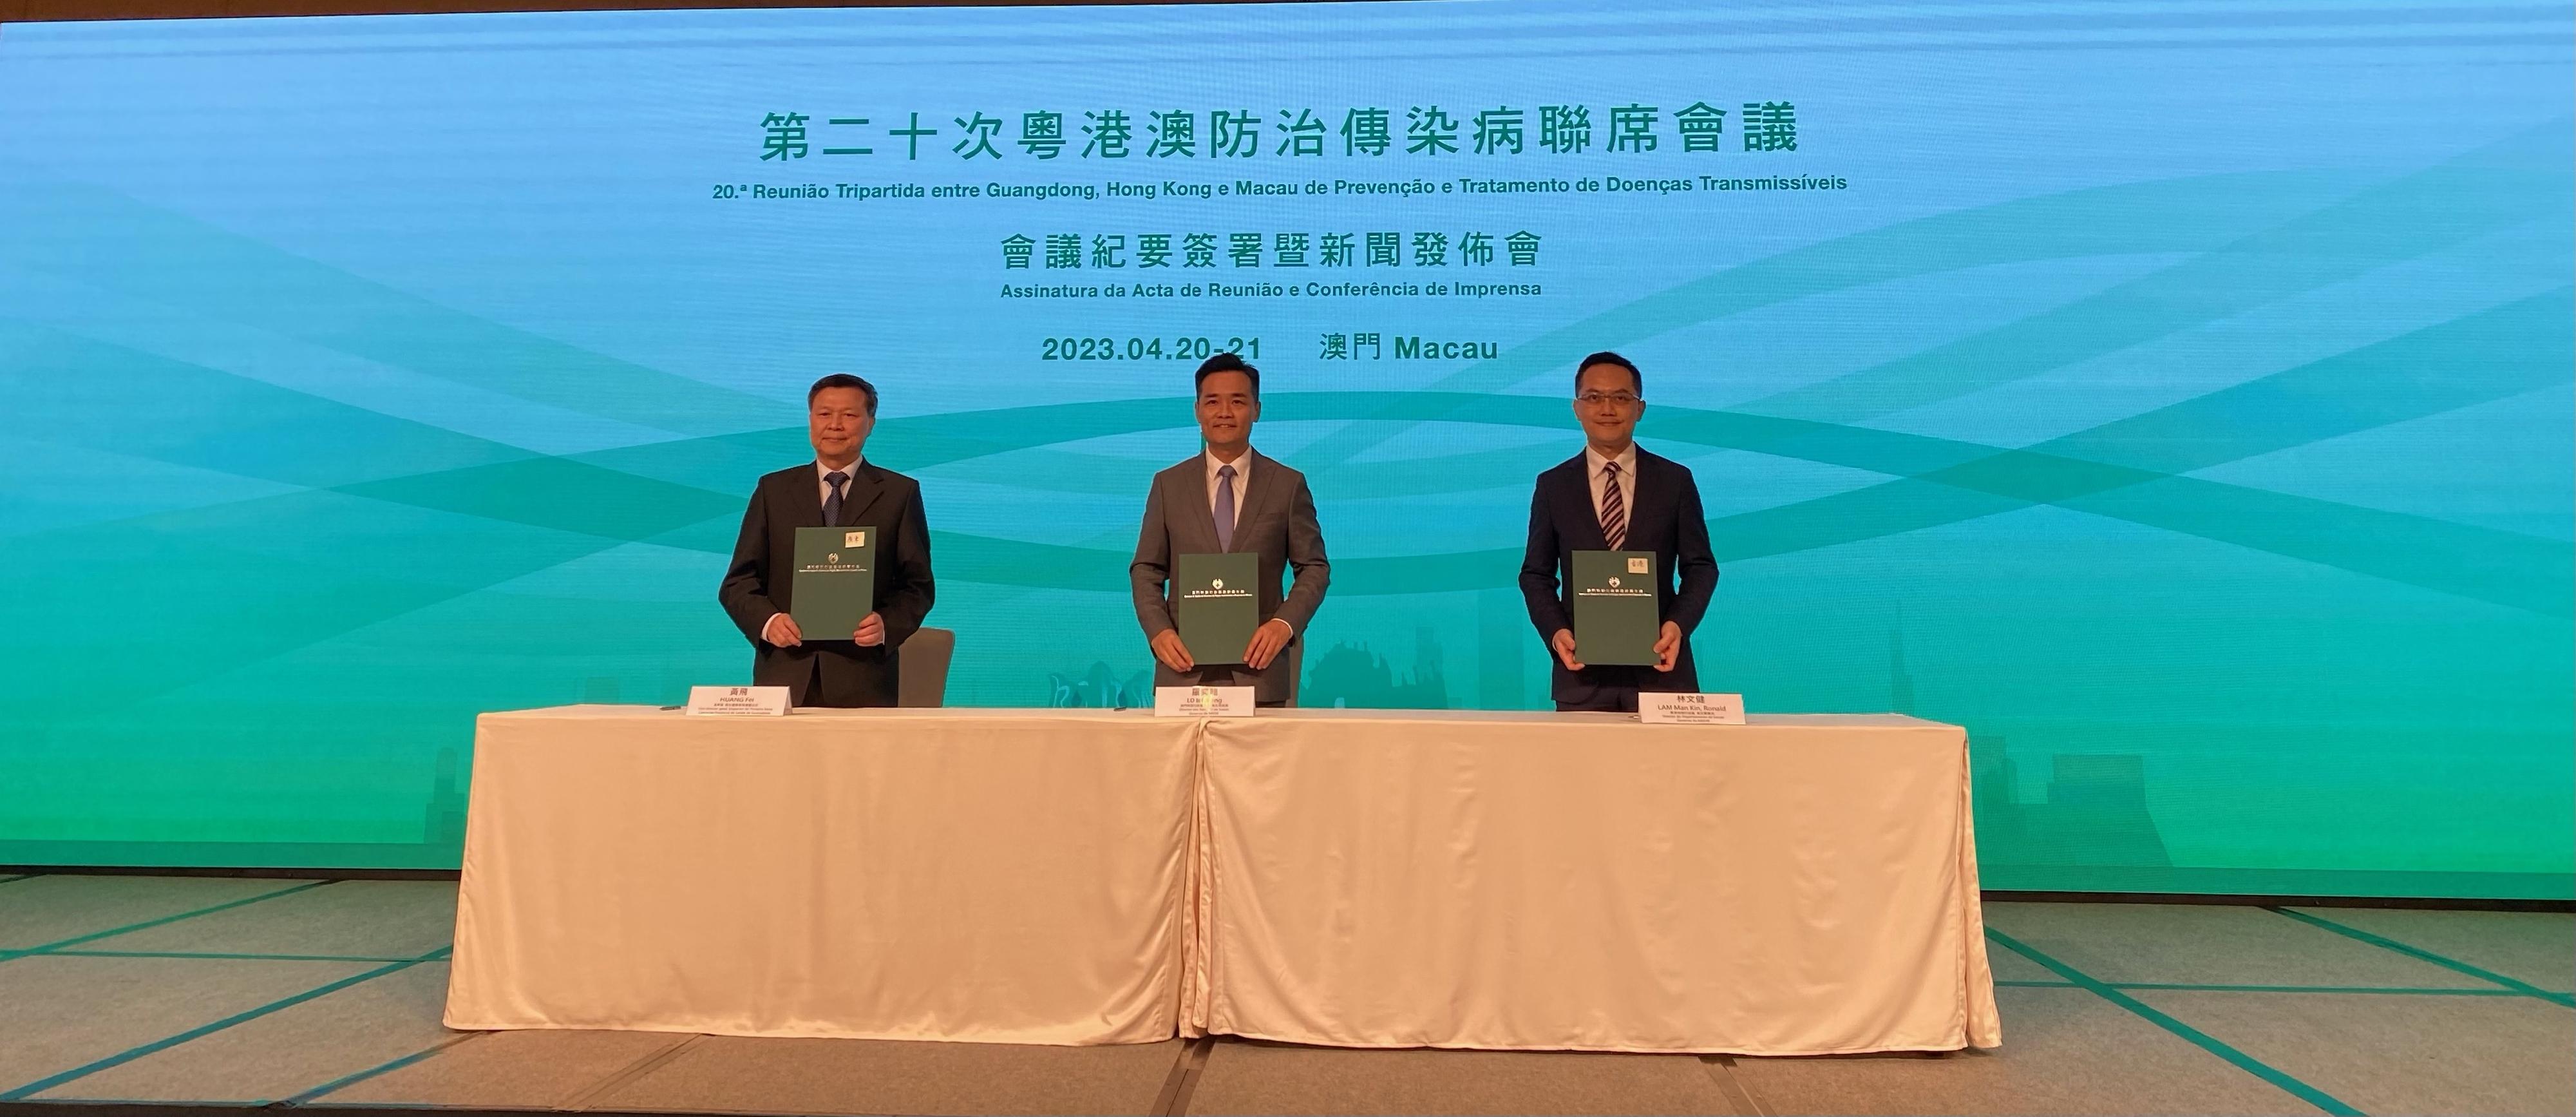 The two-day 20th Tripartite Meeting on Prevention and Control of Communicable Diseases successfully concluded in Macao today (April 21). Photo shows the Director of the Health Bureau of Macao, Dr Lo Iek-long (centre); Deputy Director General of the Health Commission of Guangdong Province Mr Huang Fei (left); and the Director of Health of Hong Kong, Dr Ronald Lam (right), signing the meeting minutes.